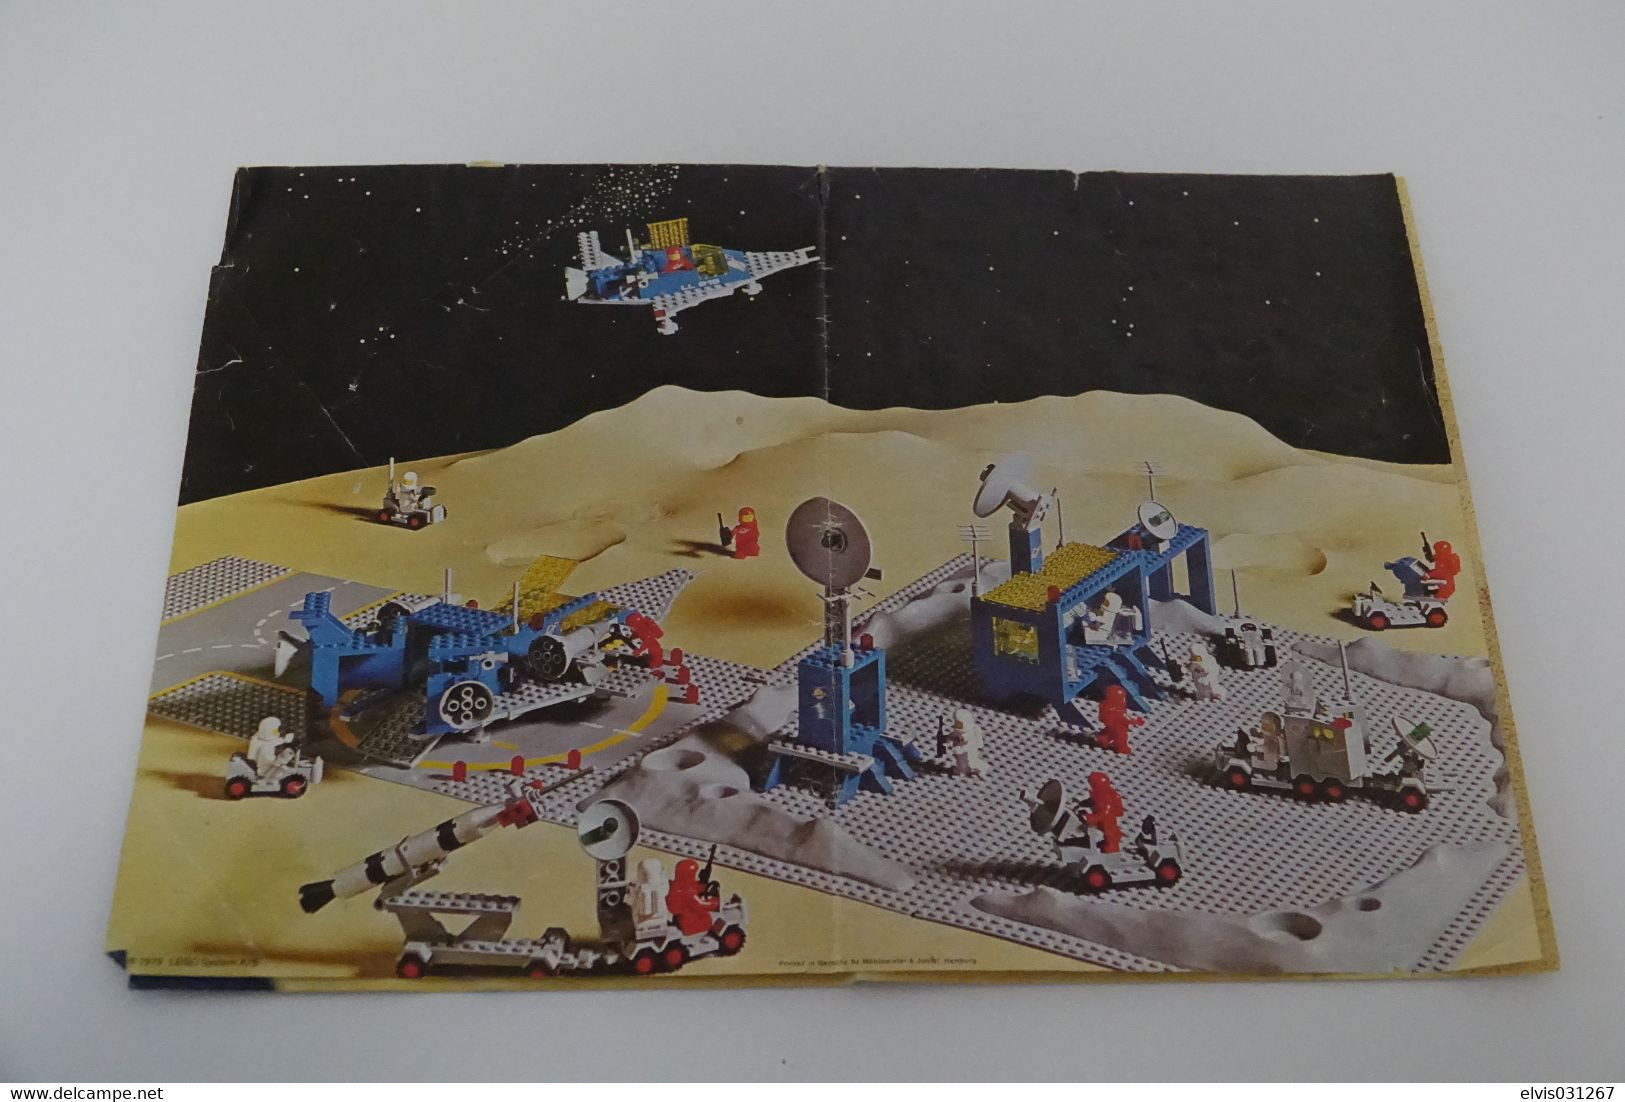 LEGO - 926 Command Centre (Center) space with box and instruction manual - Original Lego 1979 - Vintage